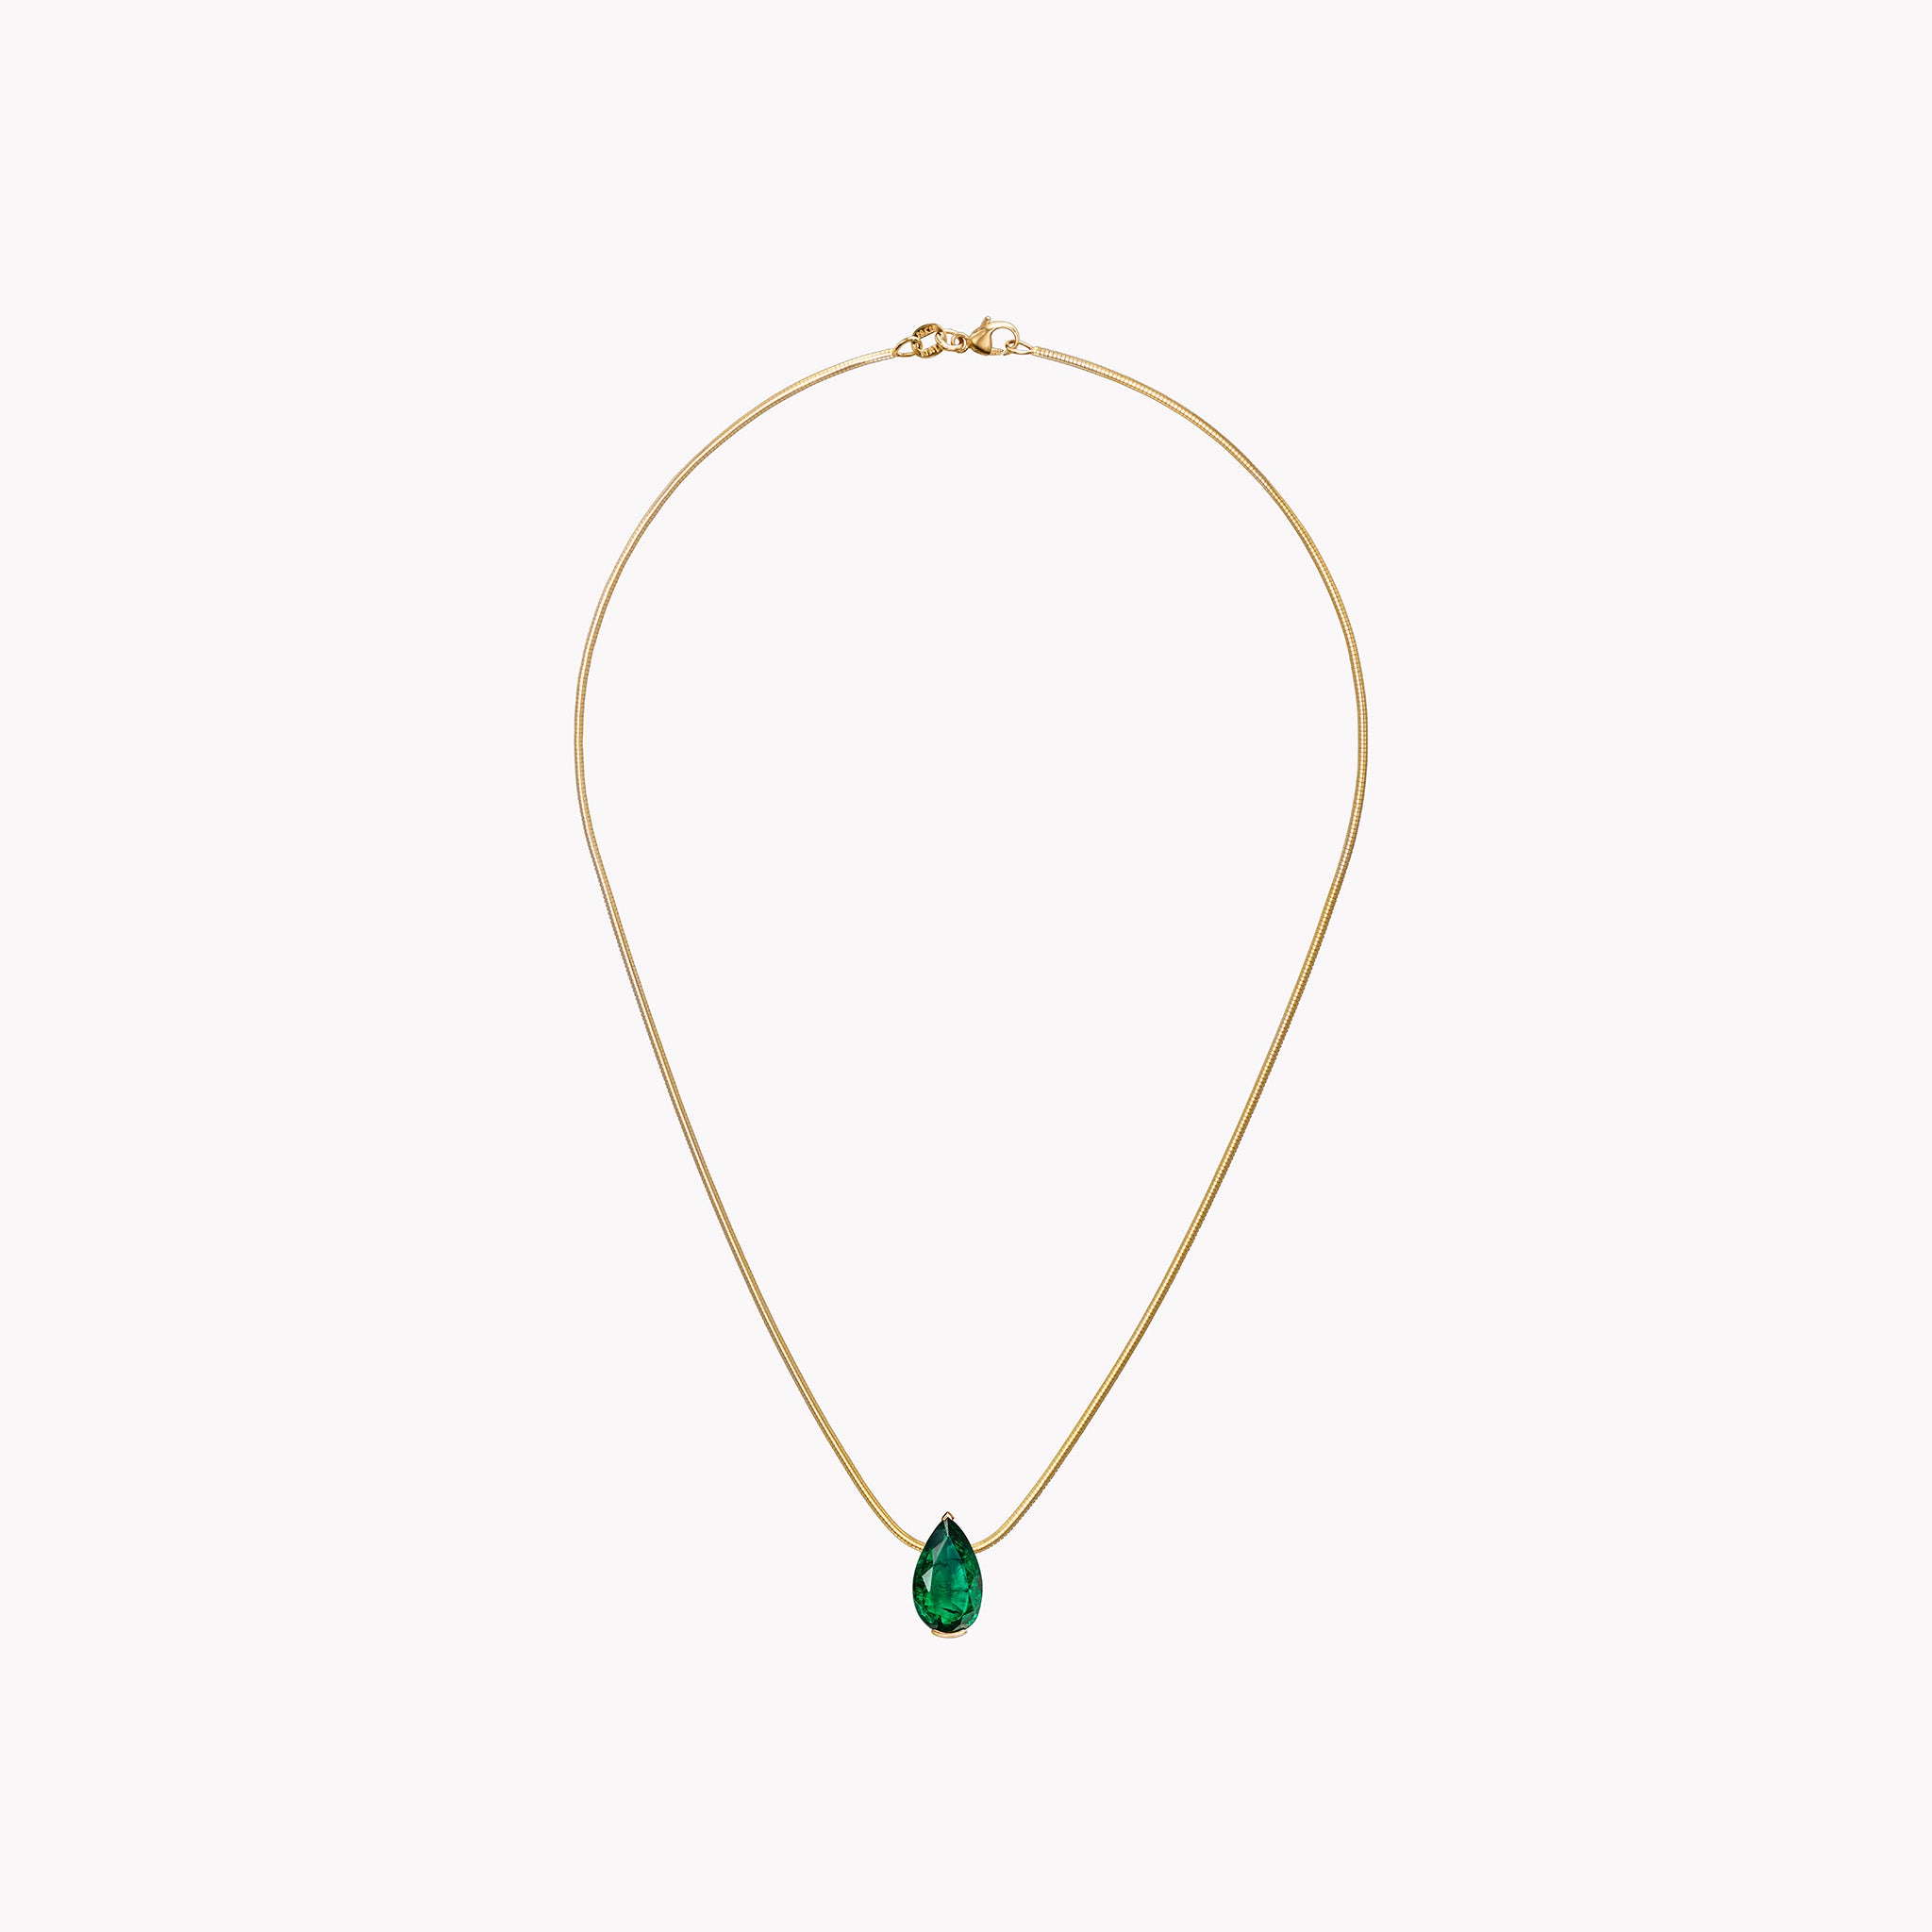 The MG Muse Emerald Pendant